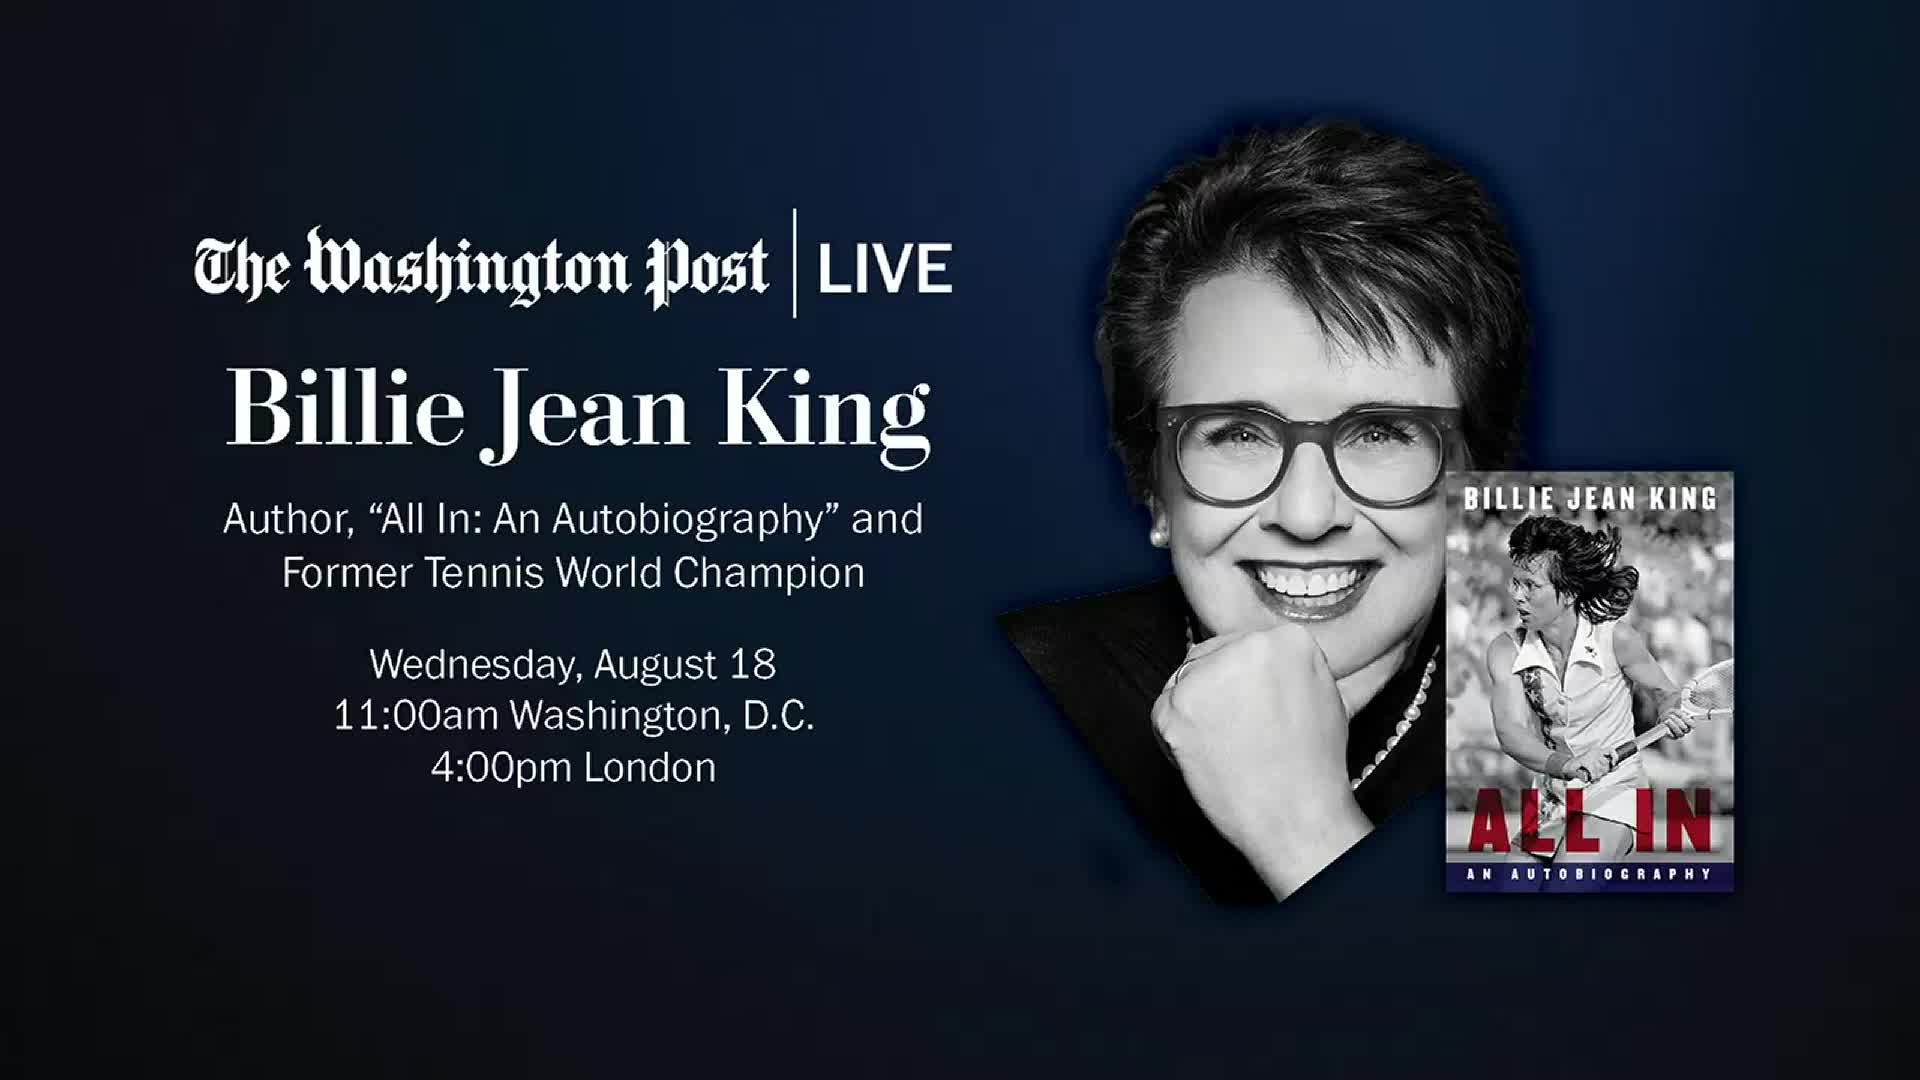 All In An Autobiography” with Author Billie Jean King